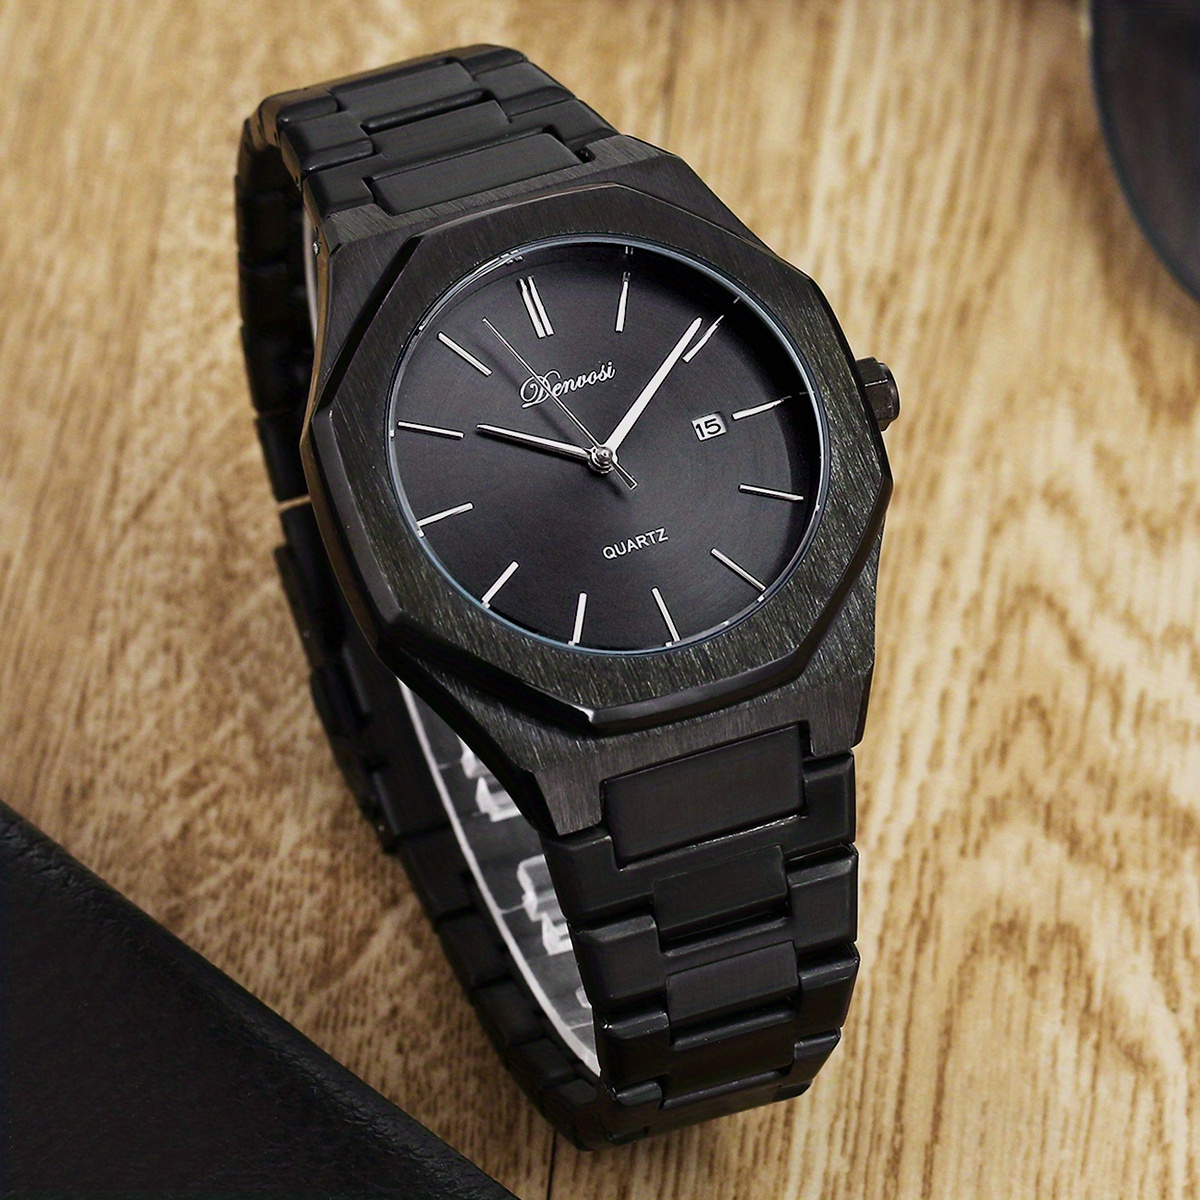 Men's Black Quartz Watch With Calendar Function Positive Octagon Dial,  Ideal choice for Gifts